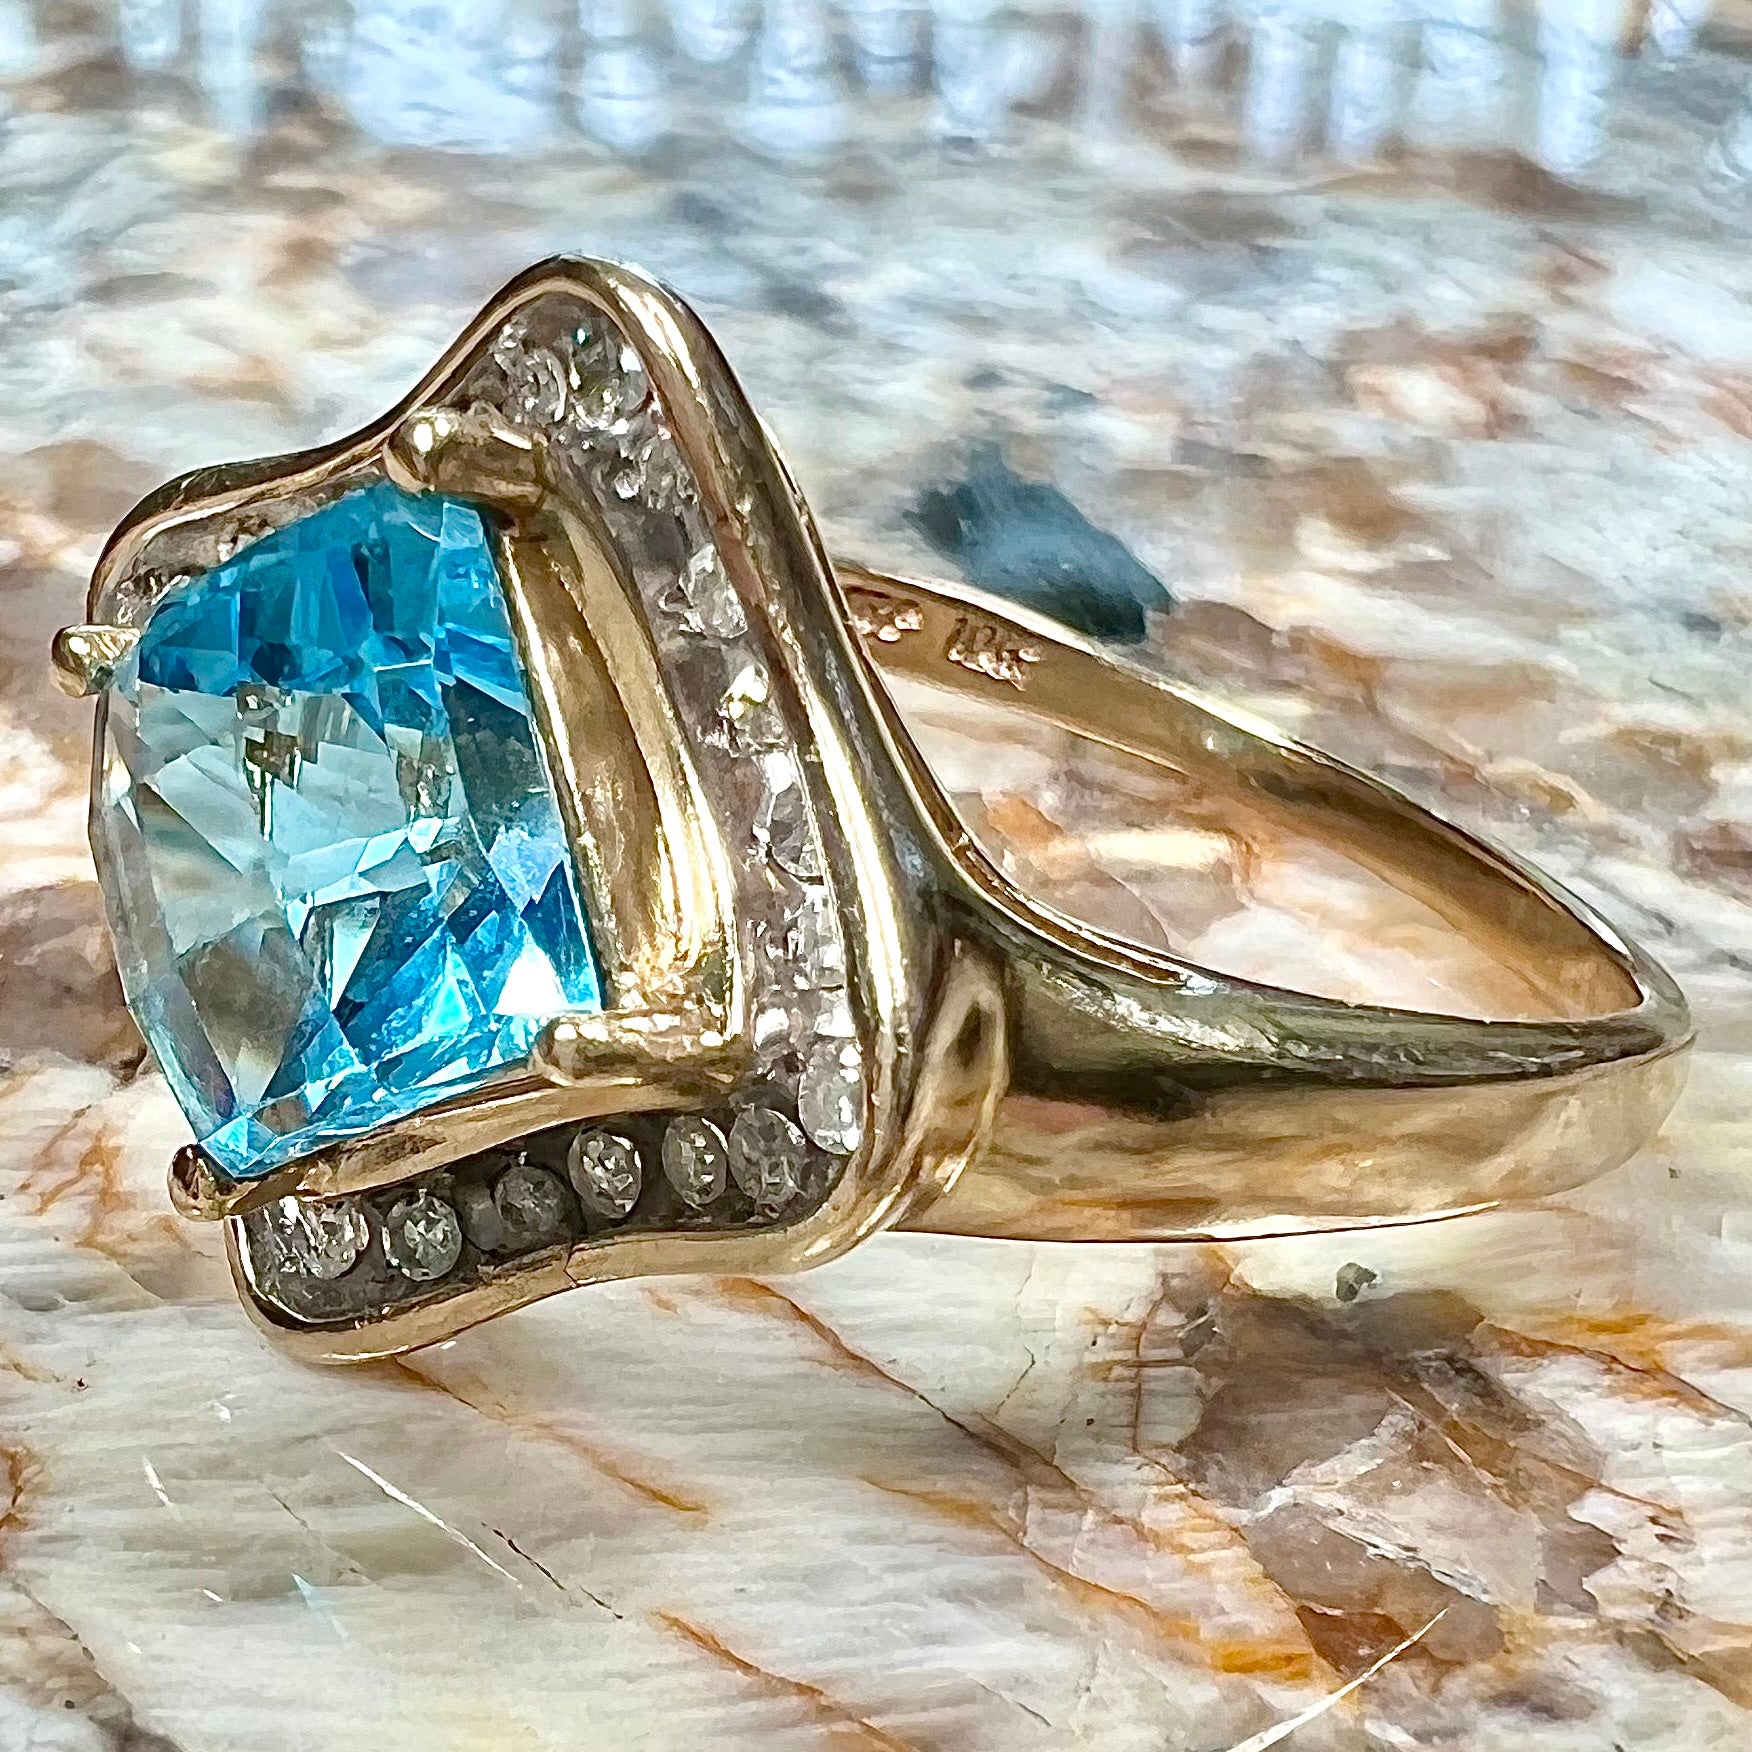 A checkerboard princess cut Swiss blue topaz ring.  The stone is set in a yellow gold, diamond halo mounting.